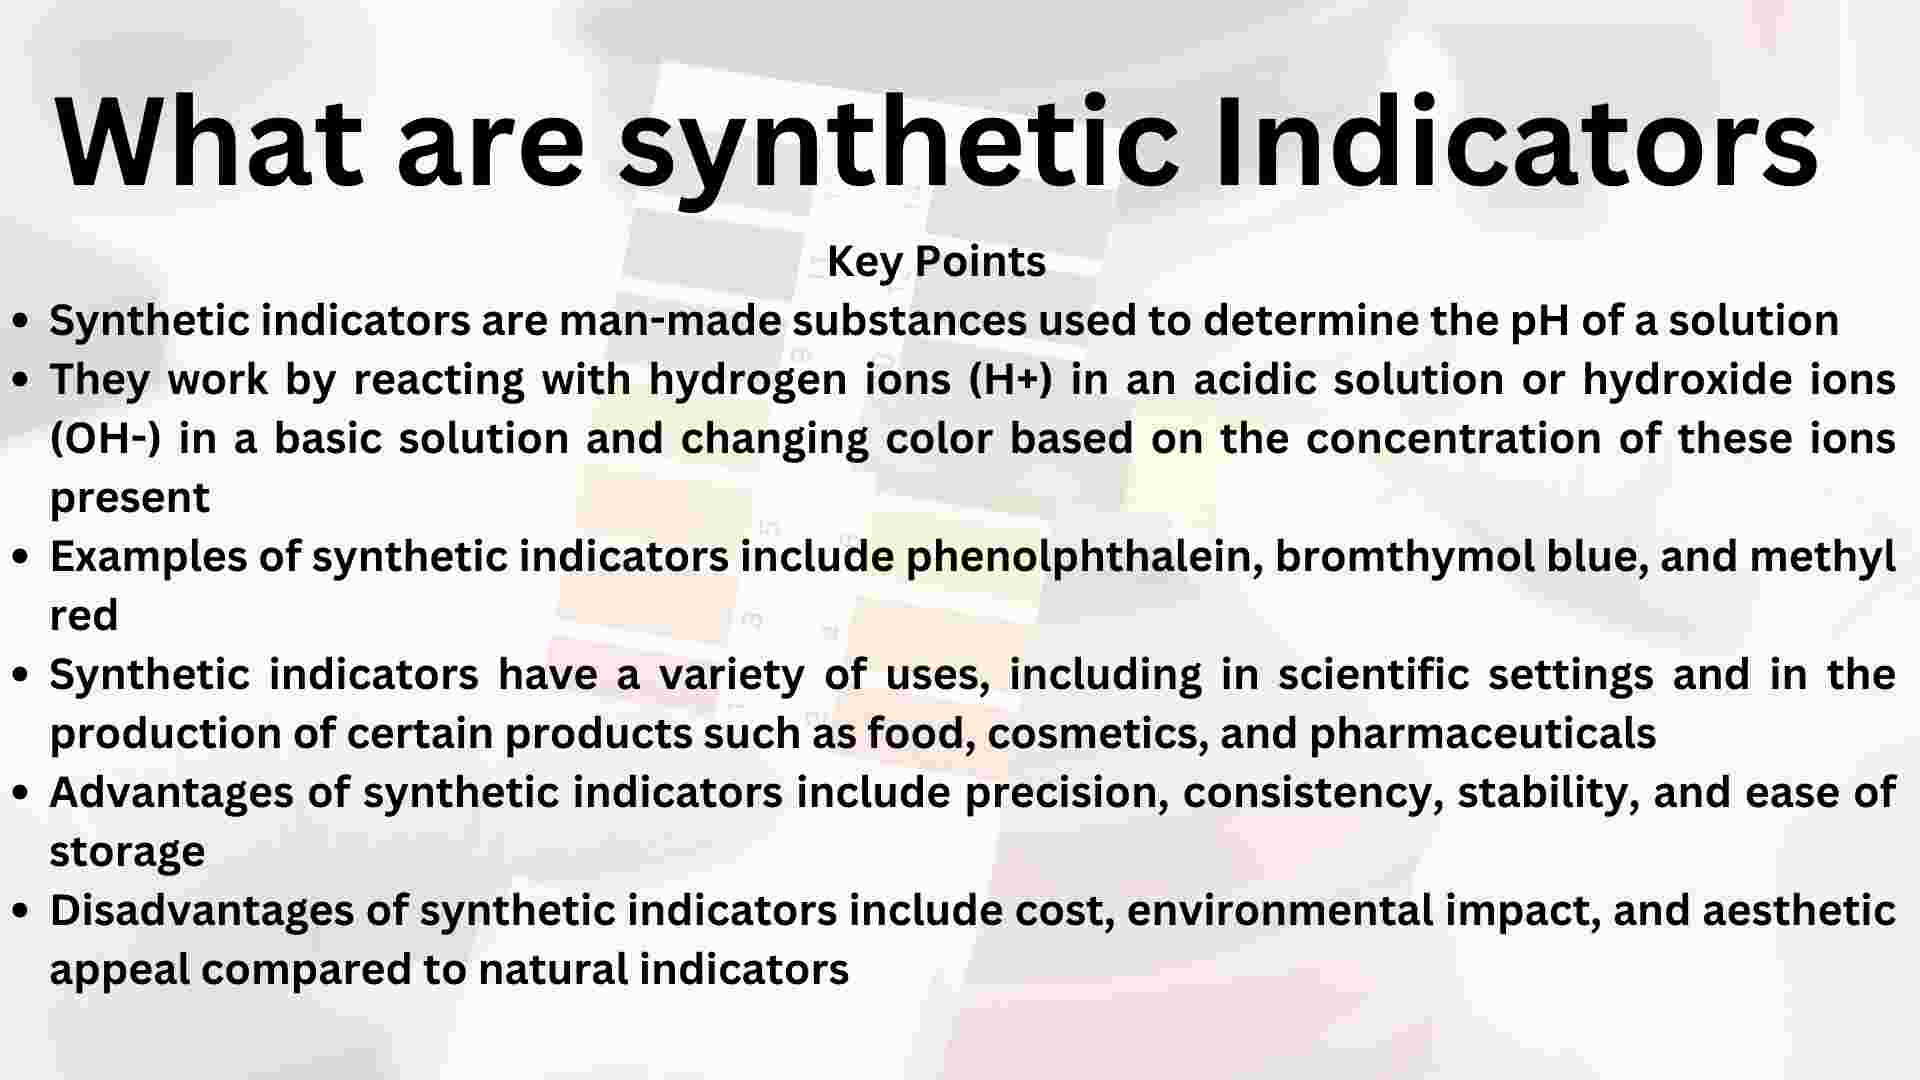 image showing key points about synthetic indicators